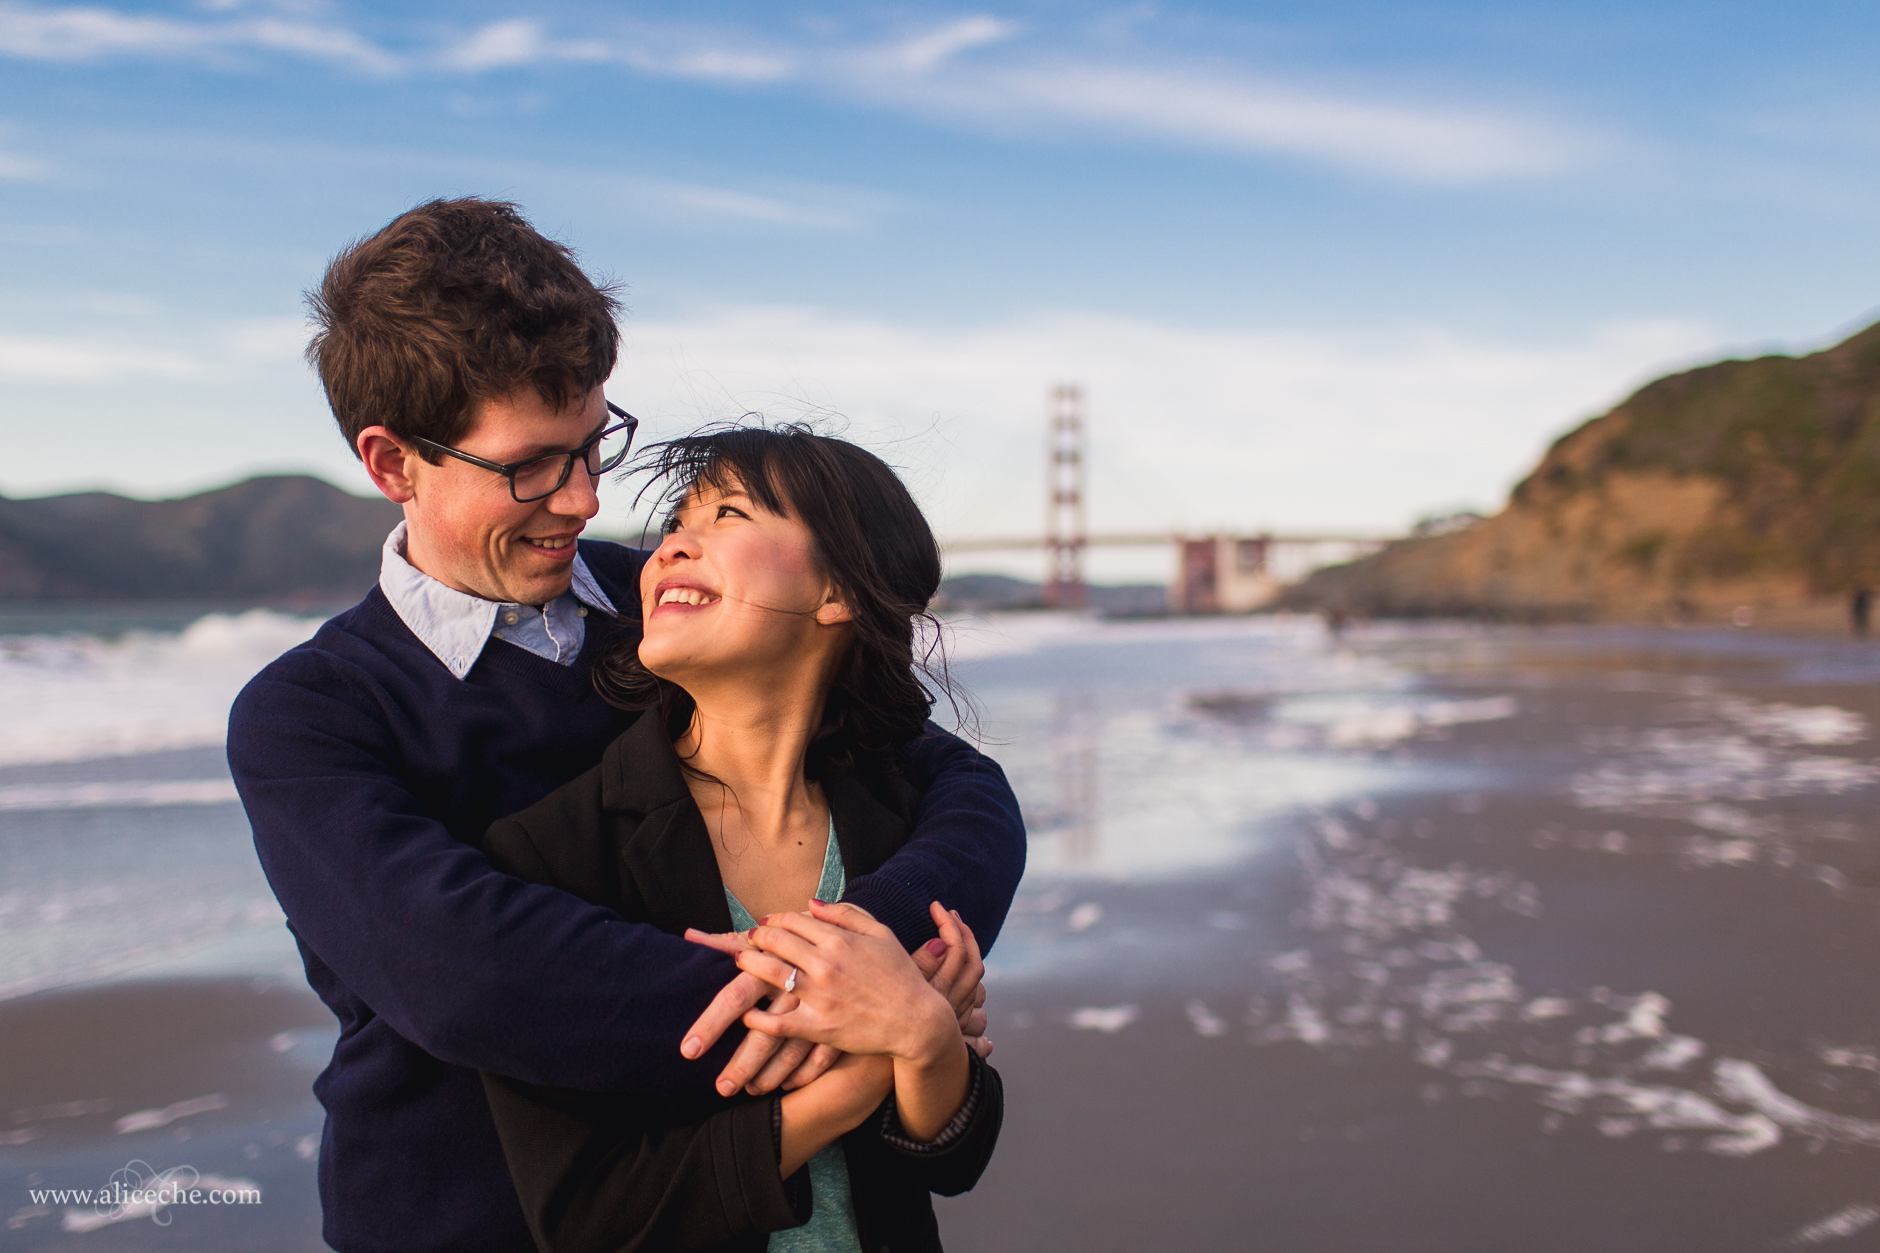 alice-che-photography-couple-on-beach-with-golden-gate-in-background-san-francisco baker beach engagement